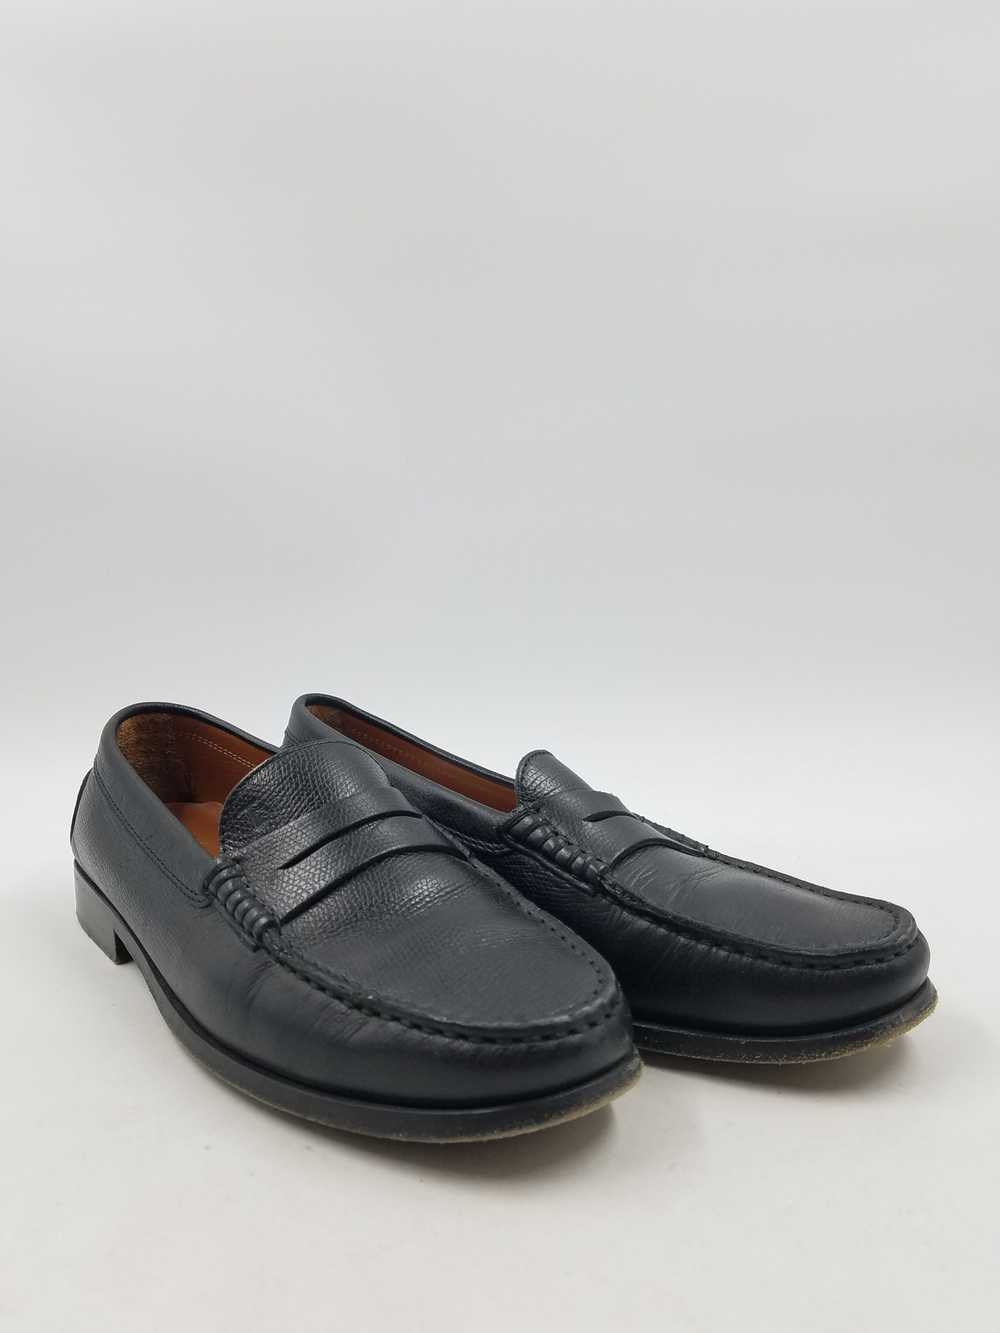 Tod's Black Penny Loafers W 6.5 COA - image 3